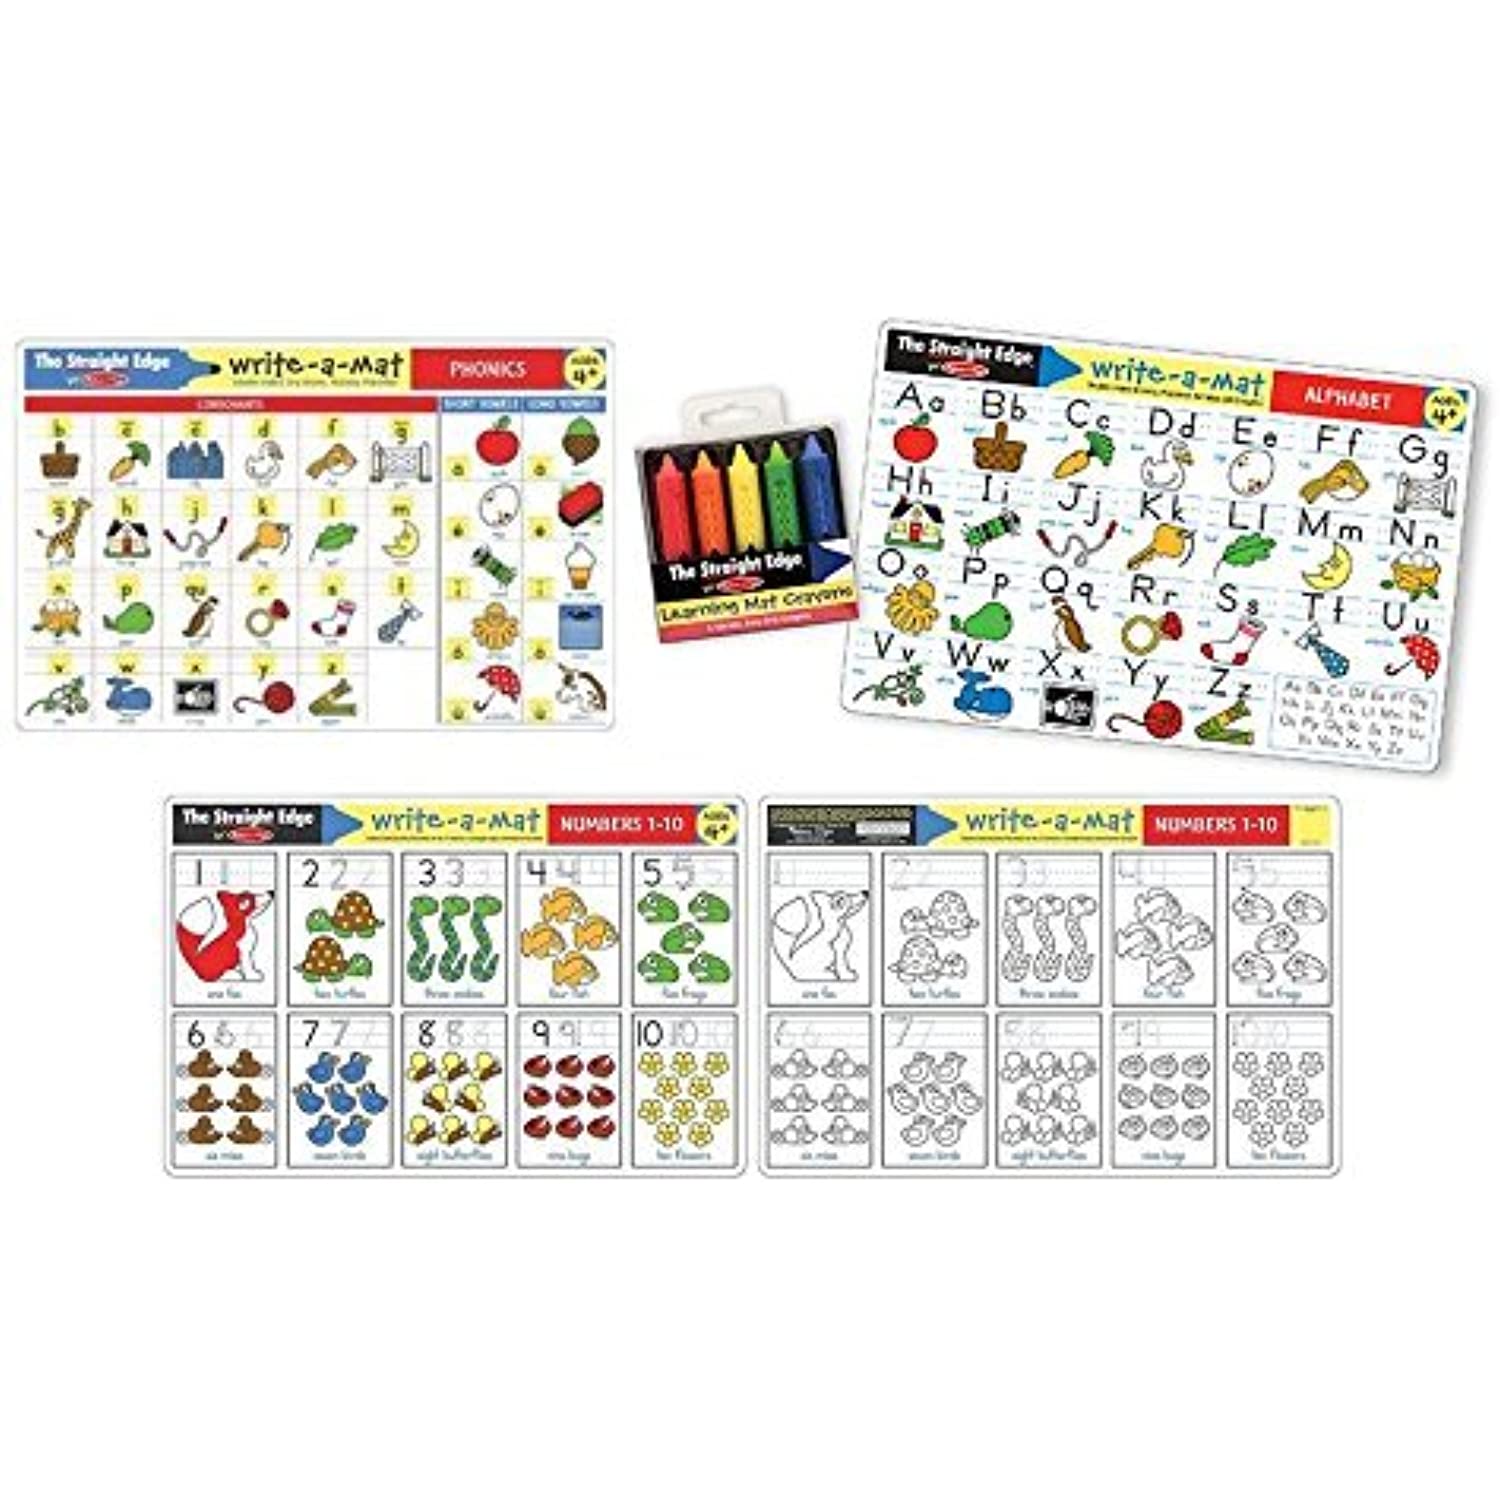 Alphabet, Numbers 1-10, Phonics Mats - 3 x Learning and Coloring Mats for age 4+ with bonus Learning Mat Crayons by Melissa & Doug